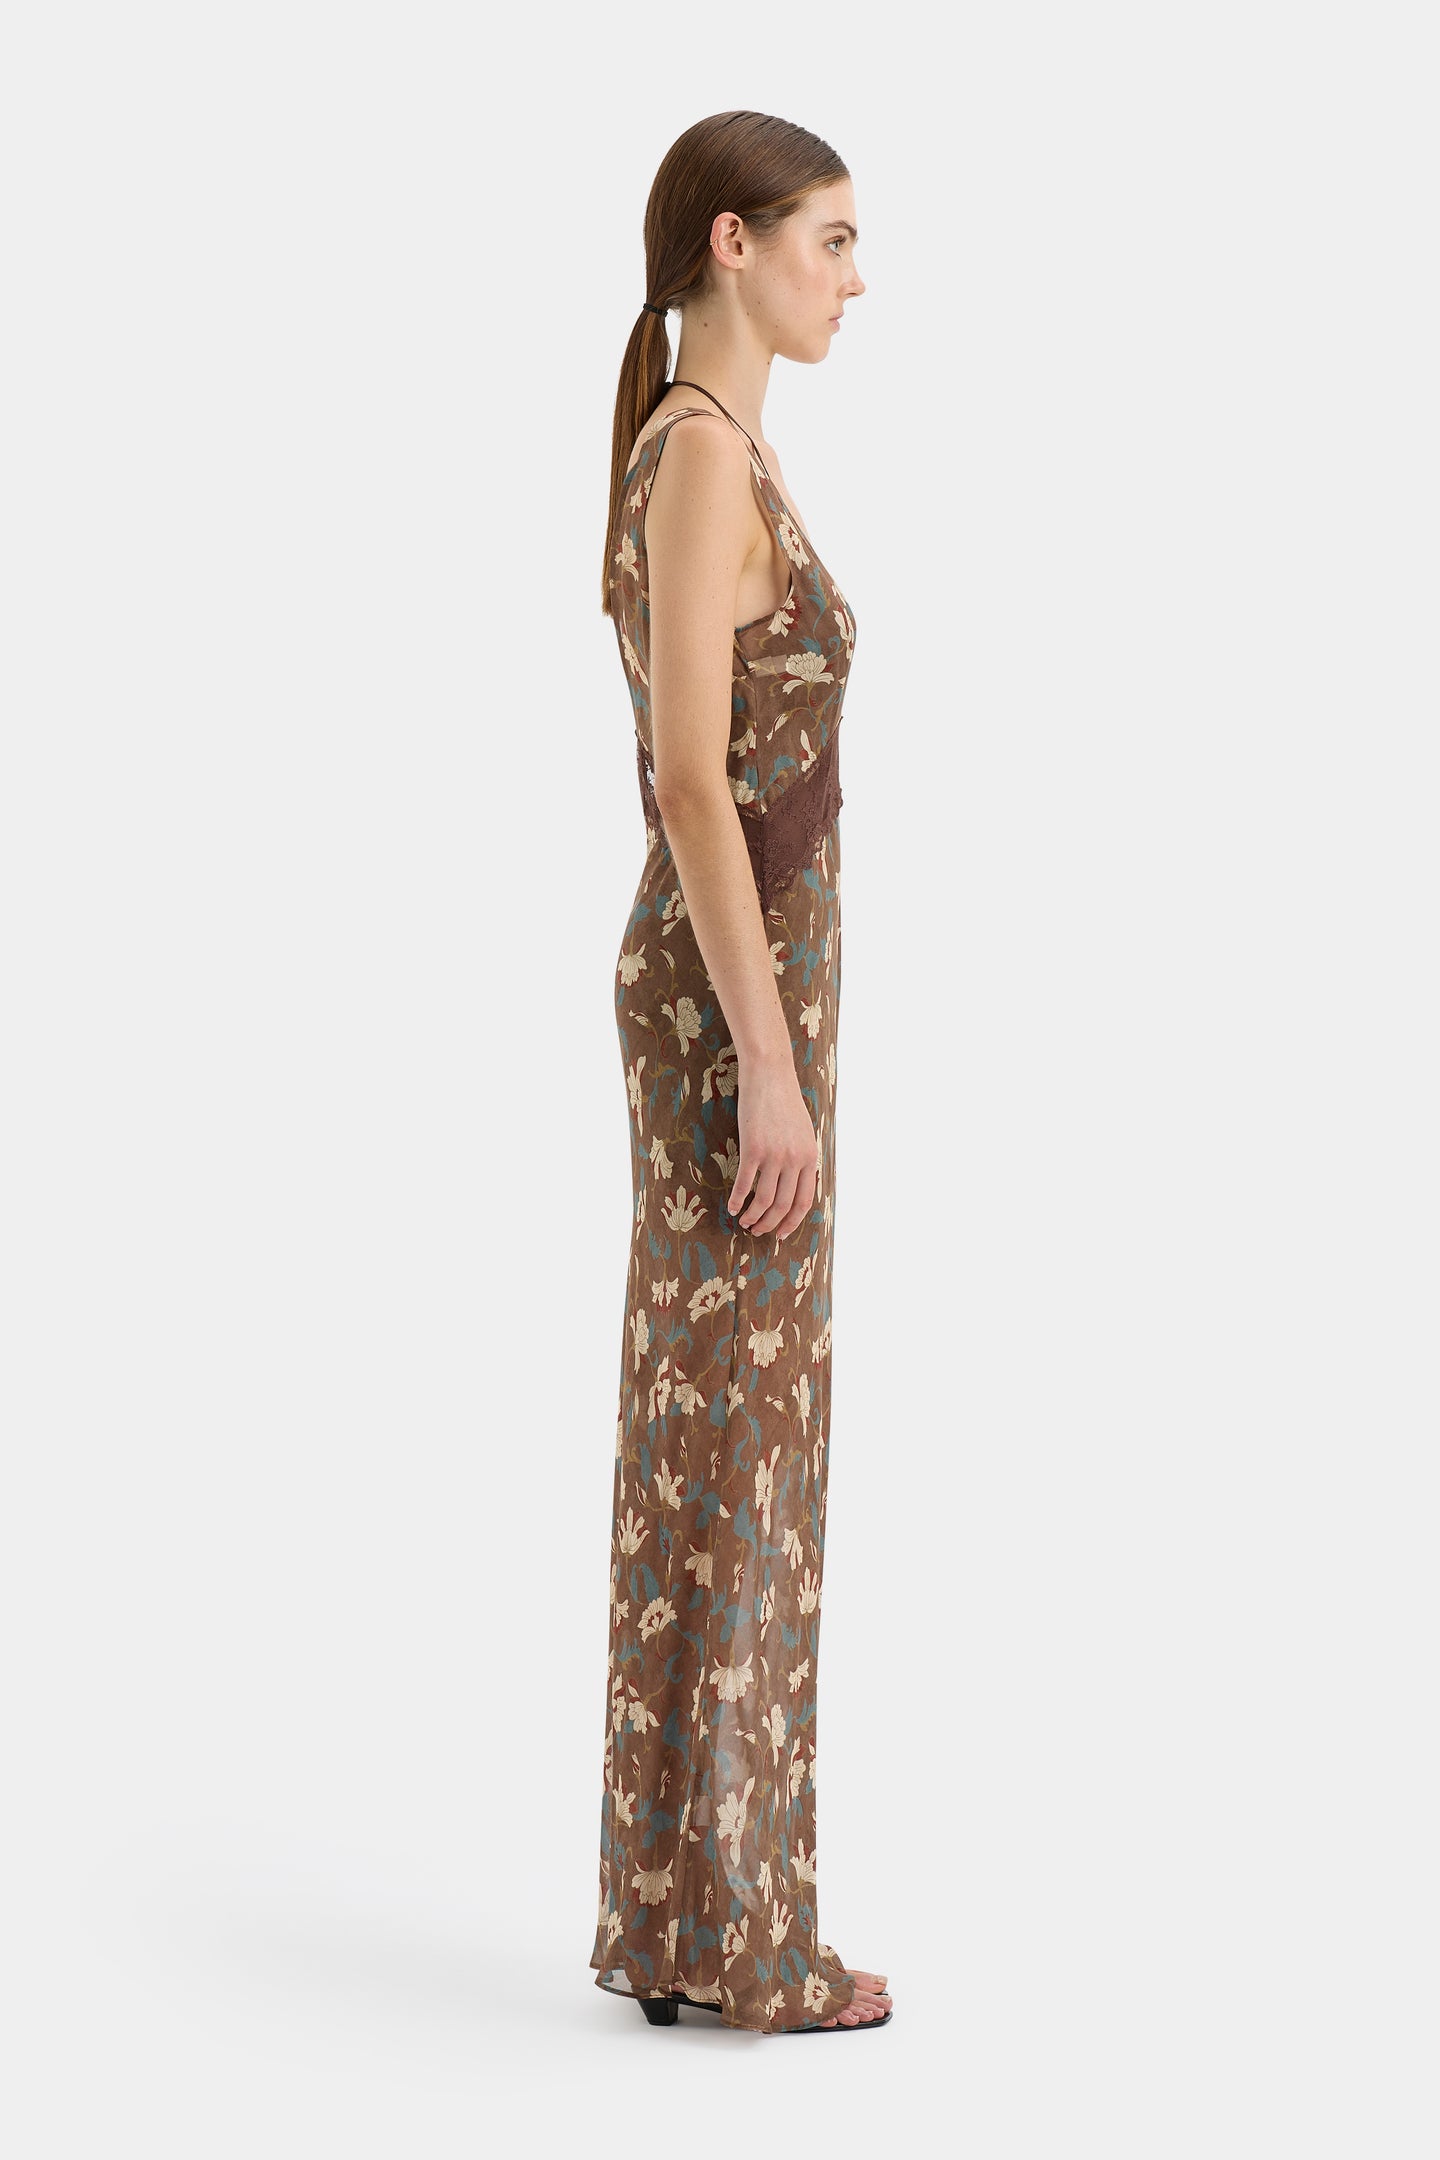 SIR the label Avellino Lace Layered Dress CHOCOLATE FIORE PRINT